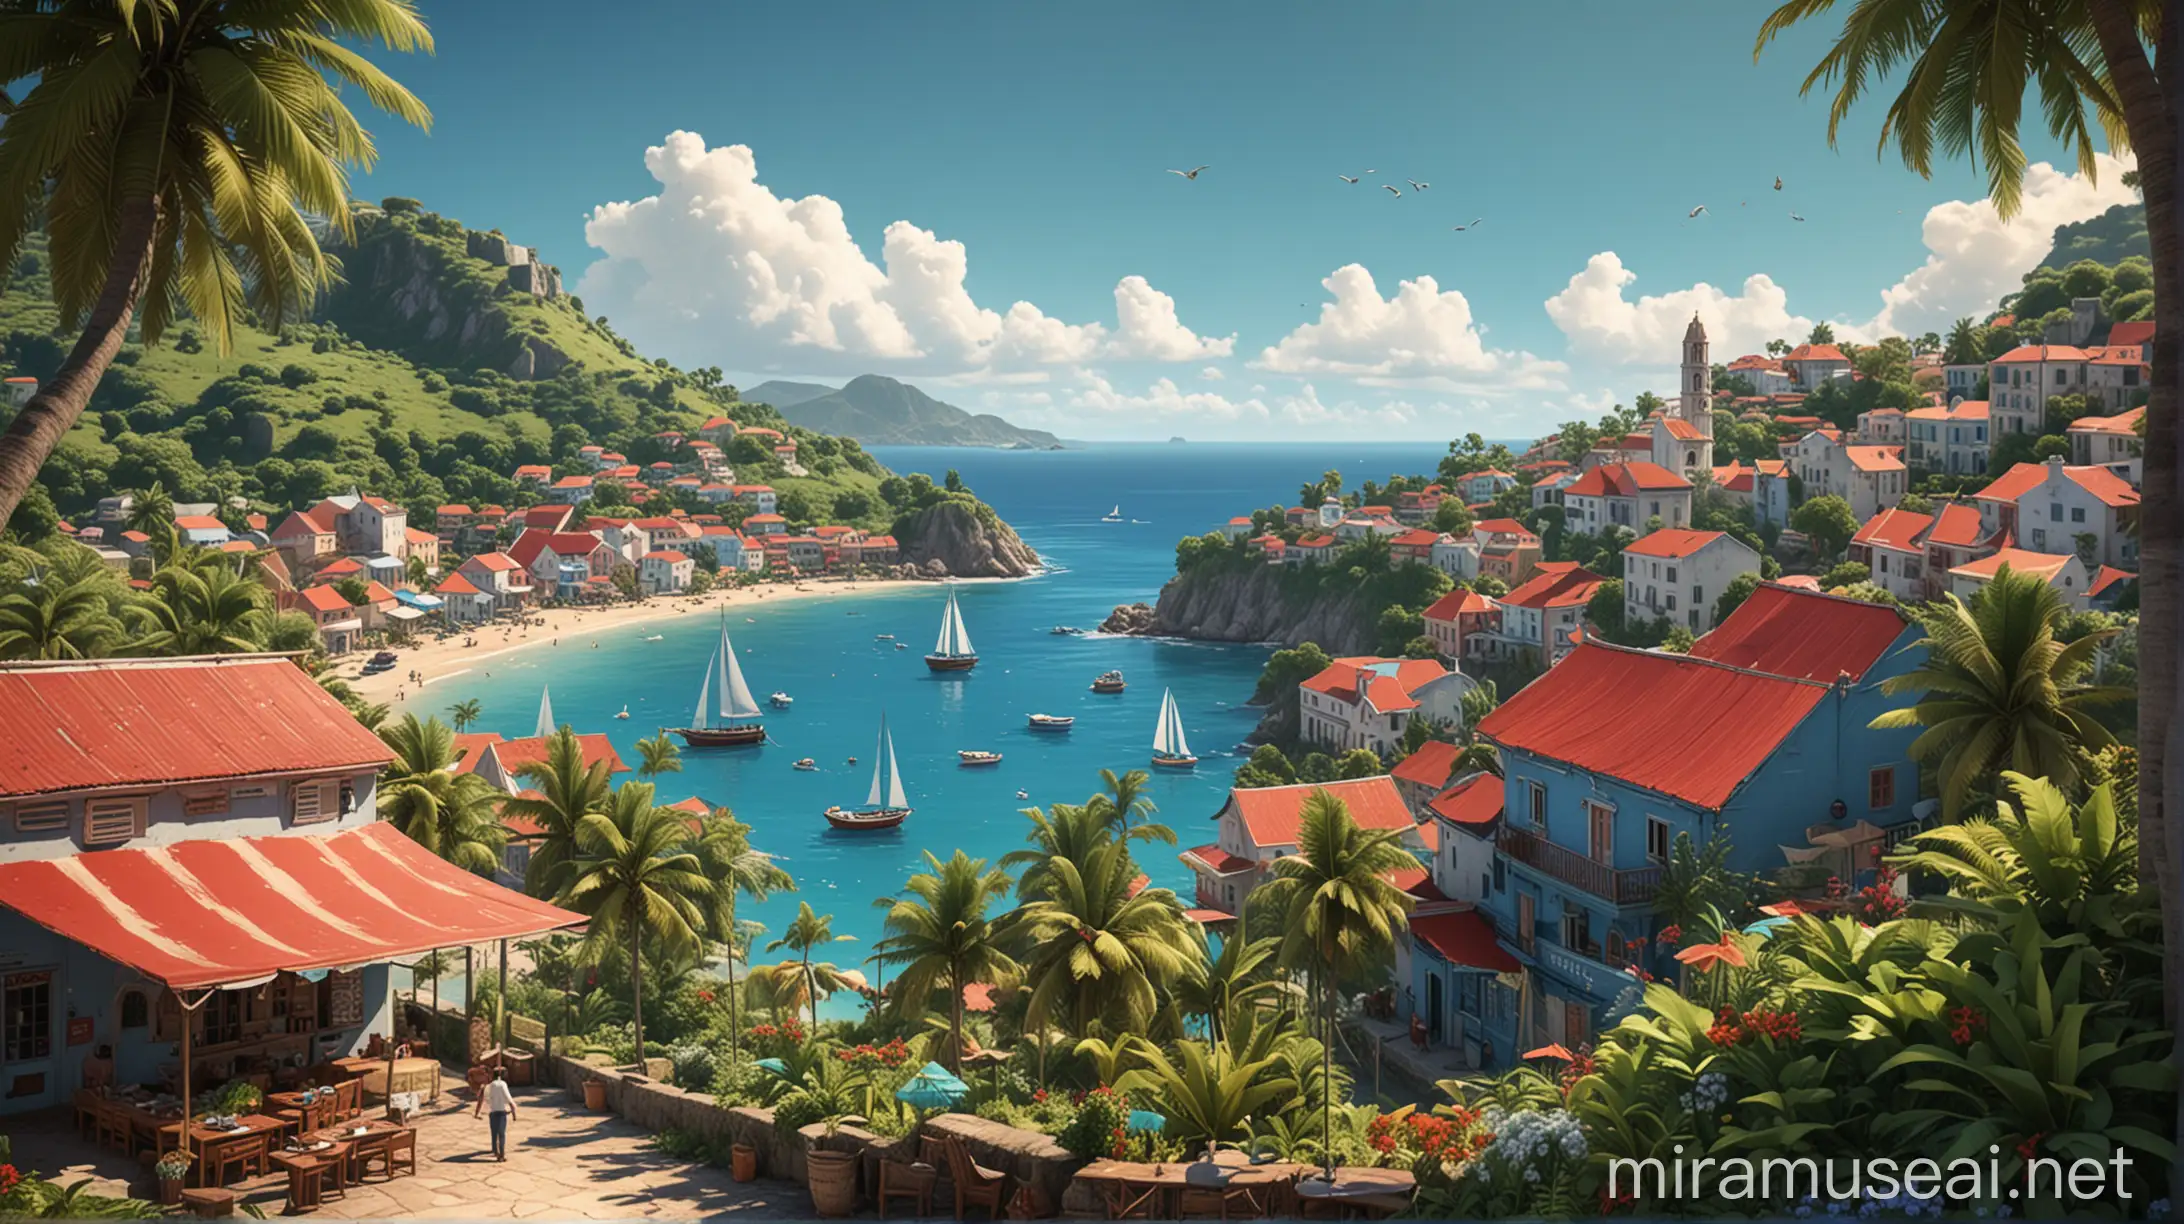 Create a vibrant and immersive video game illustration inspired by a picturesque coastal town in Guadeloupe. The scene captures the town nestled between lush green hills and a sparkling blue bay dotted with sailboats. The town's red-roofed houses, narrow winding streets, and central church tower evoke a sense of charm and history. Include lively market stalls with colorful canopies, locals interacting warmly, and elements of tropical flora. The background should feature the expansive sea with distant islands and a clear blue sky. Emphasize the natural beauty, cultural richness, and inviting atmosphere, making it feel like a perfect adventure setting for a video game. --v 5 --ar 16:9 --q 2 --style video game